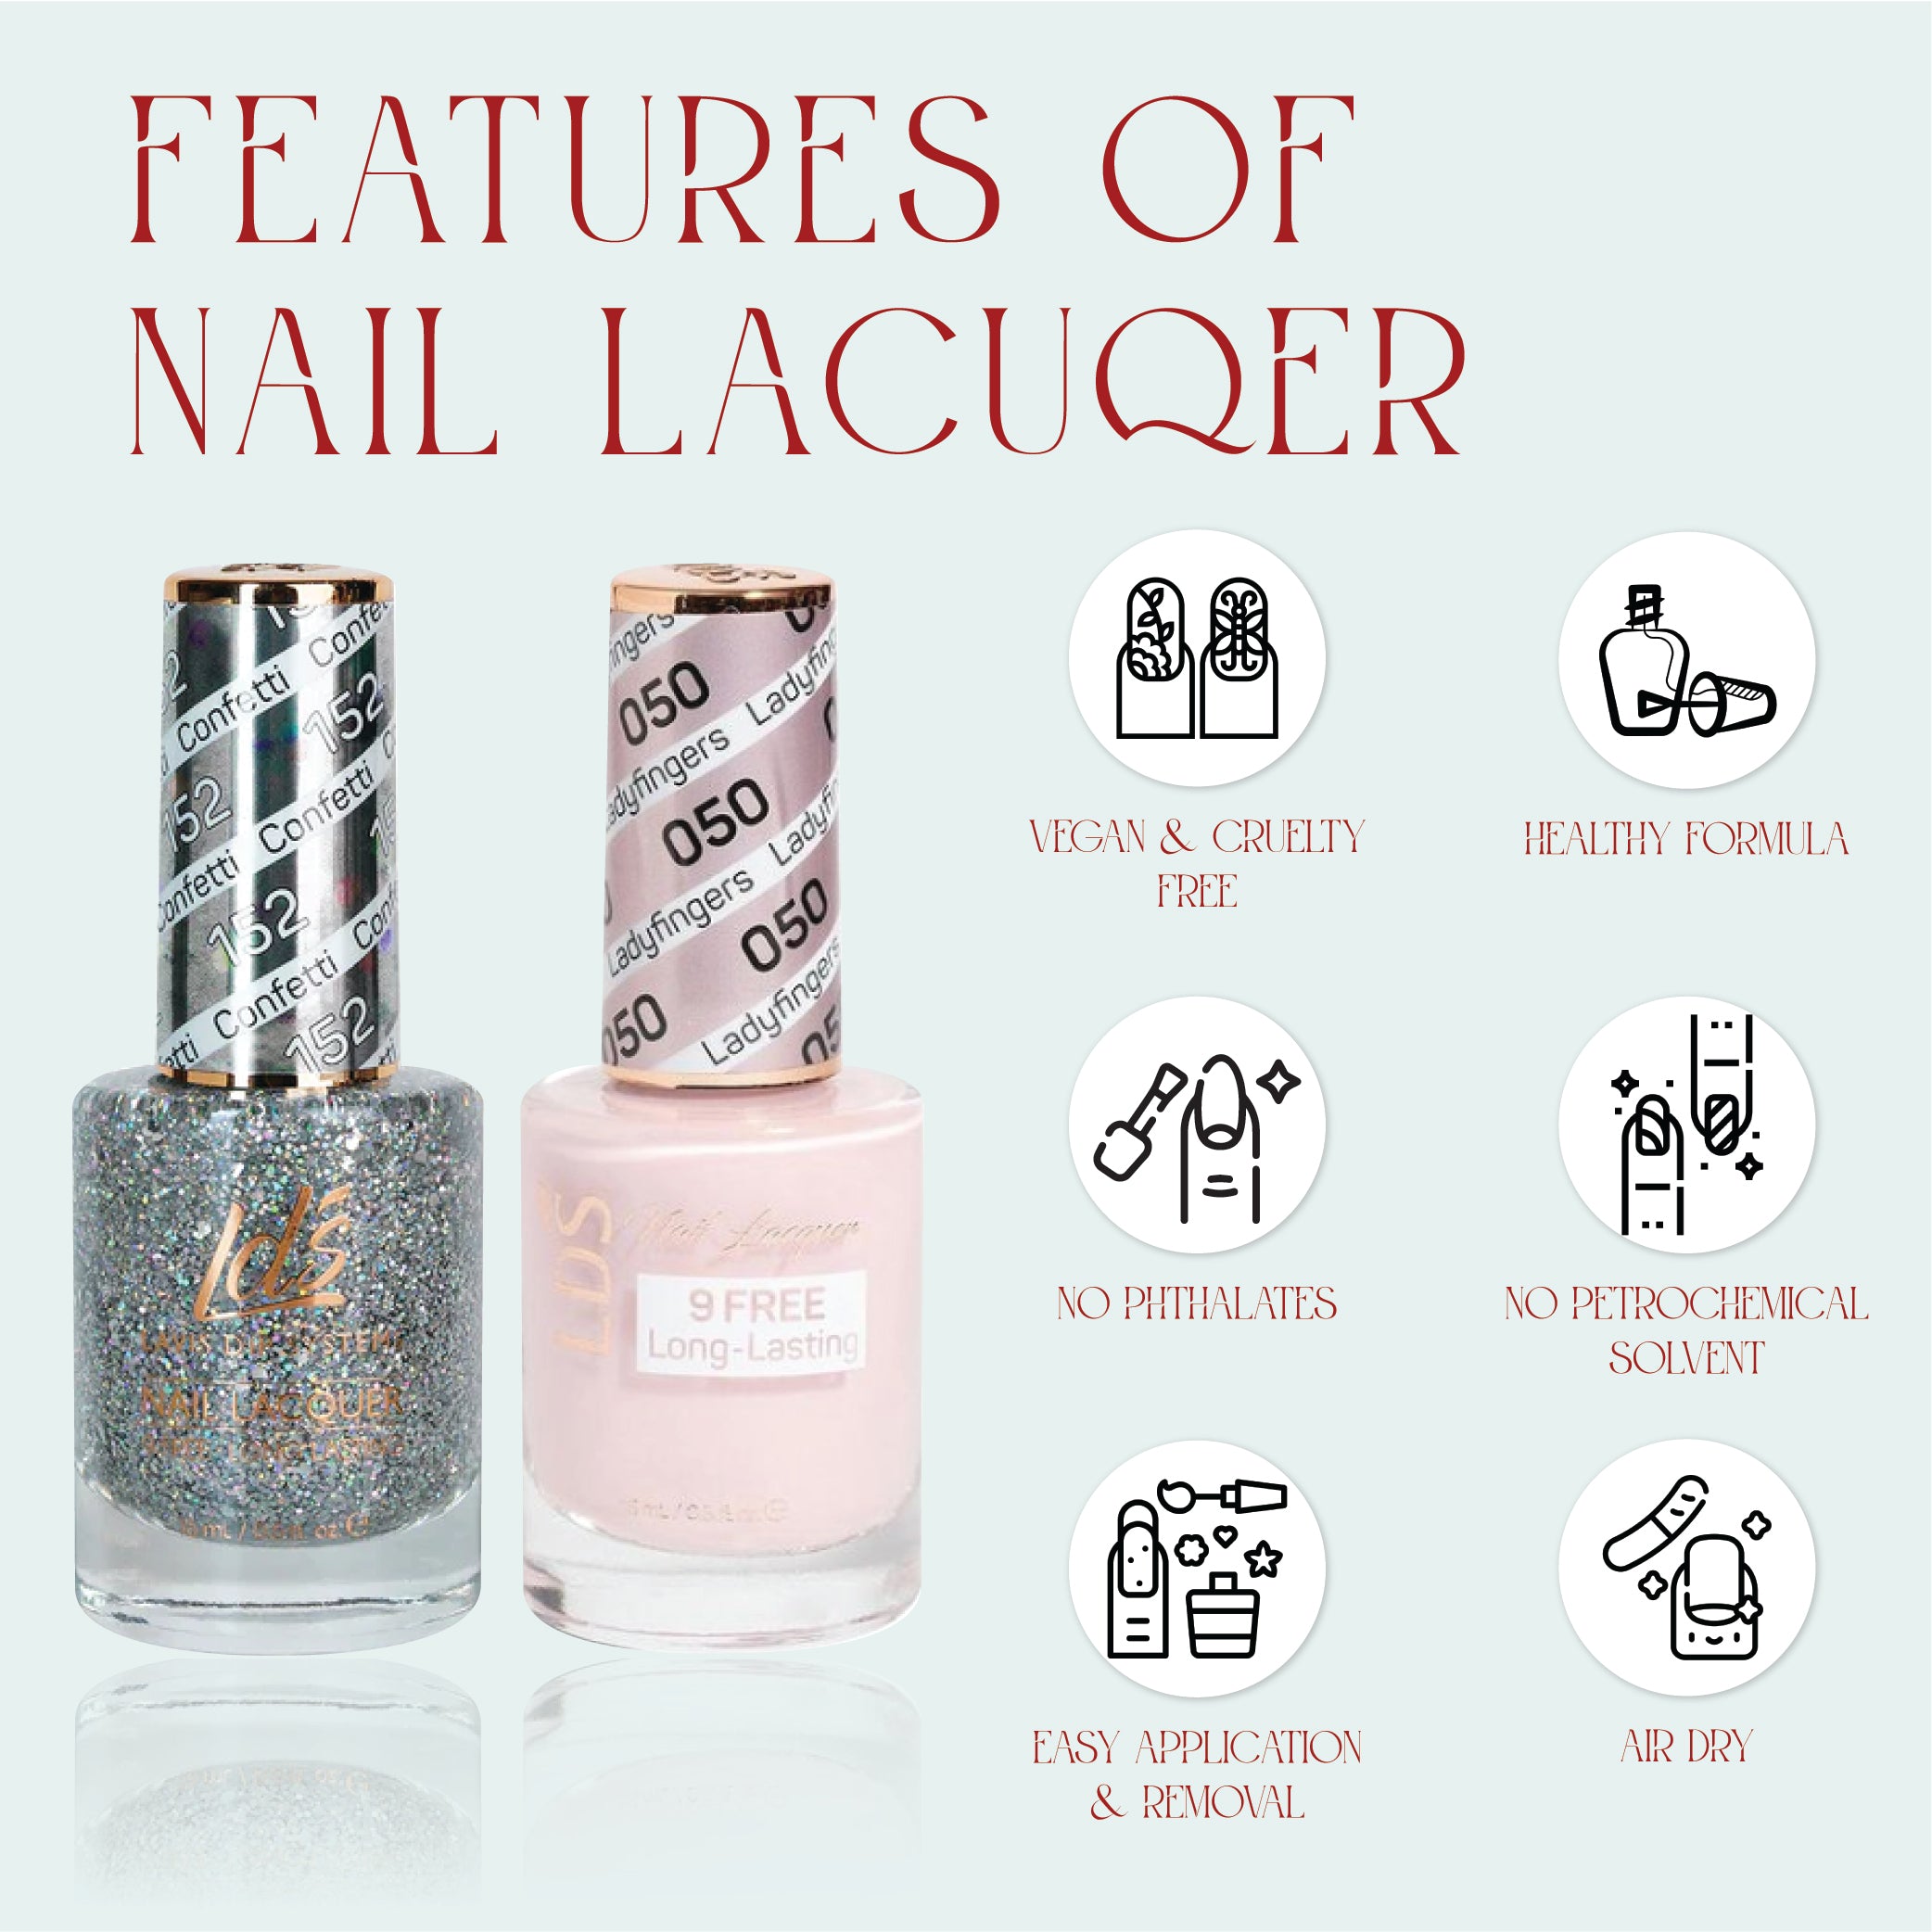 LDS Gel Nail Polish Duo - 139 Pink Colors - Make Them Stop And Stare